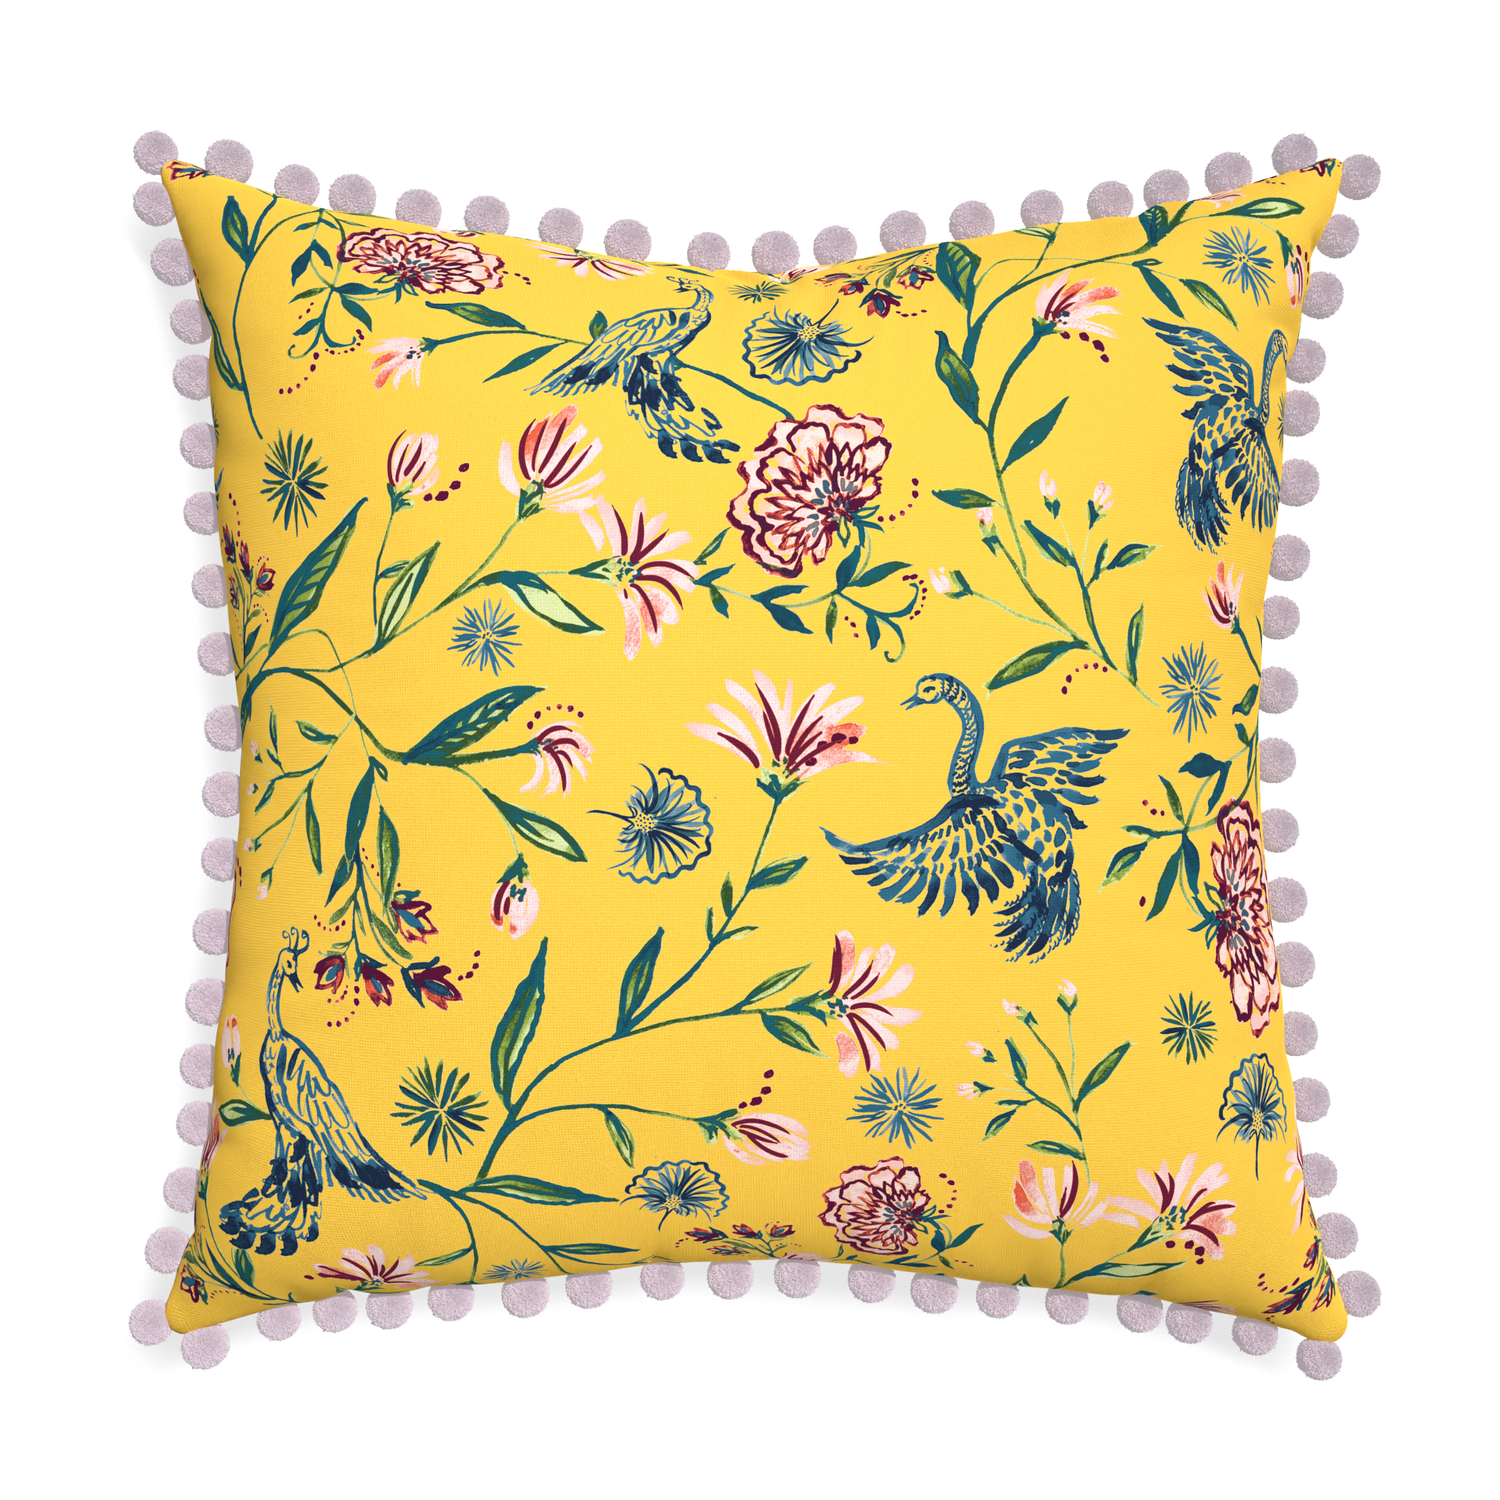 Euro-sham daphne canary custom pillow with l on white background